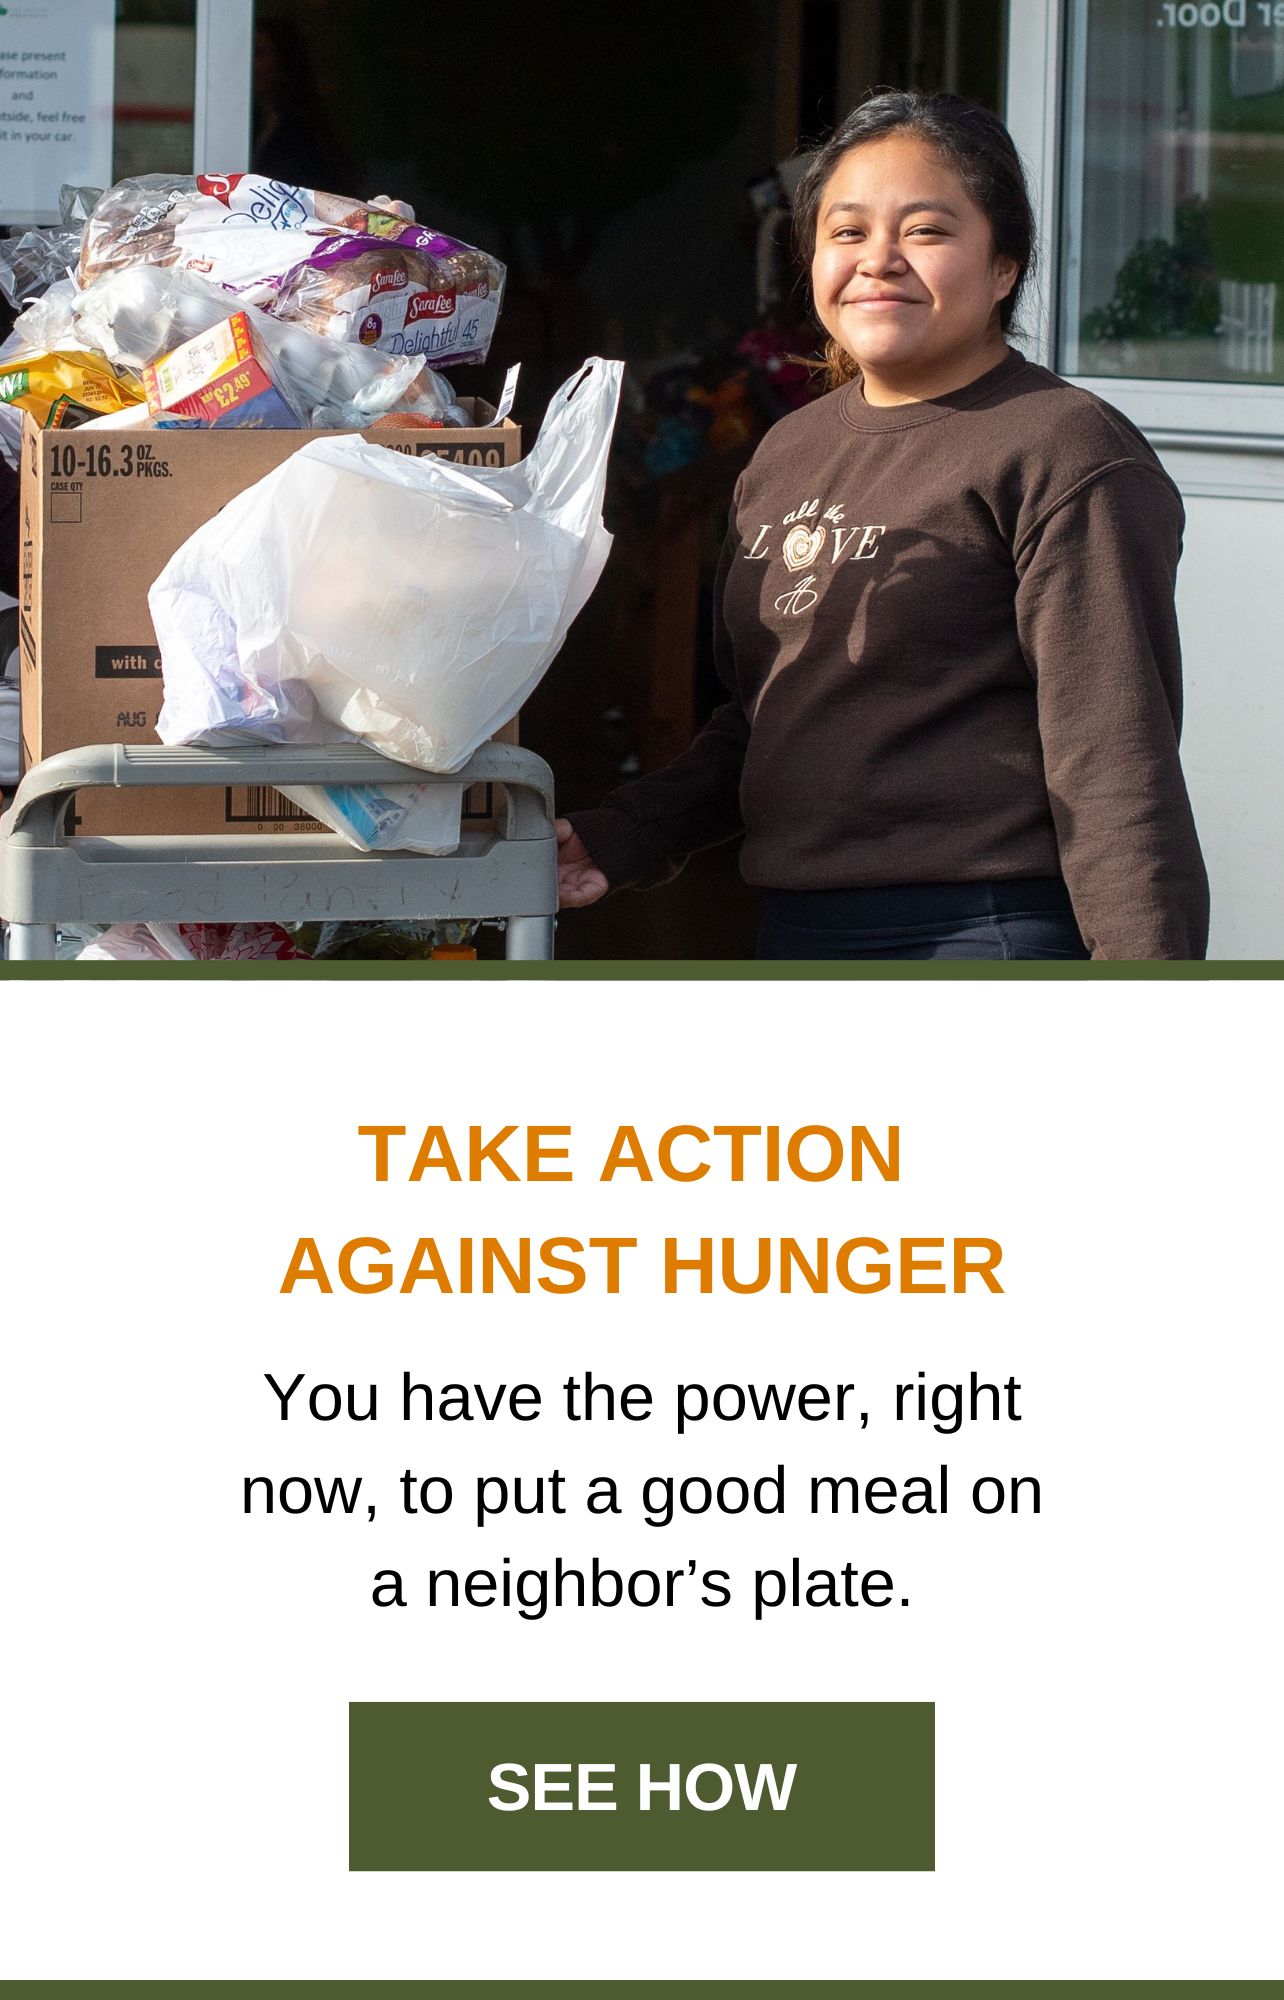 Take action against hunger. You have the power, right now, to put a food meal on a neighbor's plate. See how.